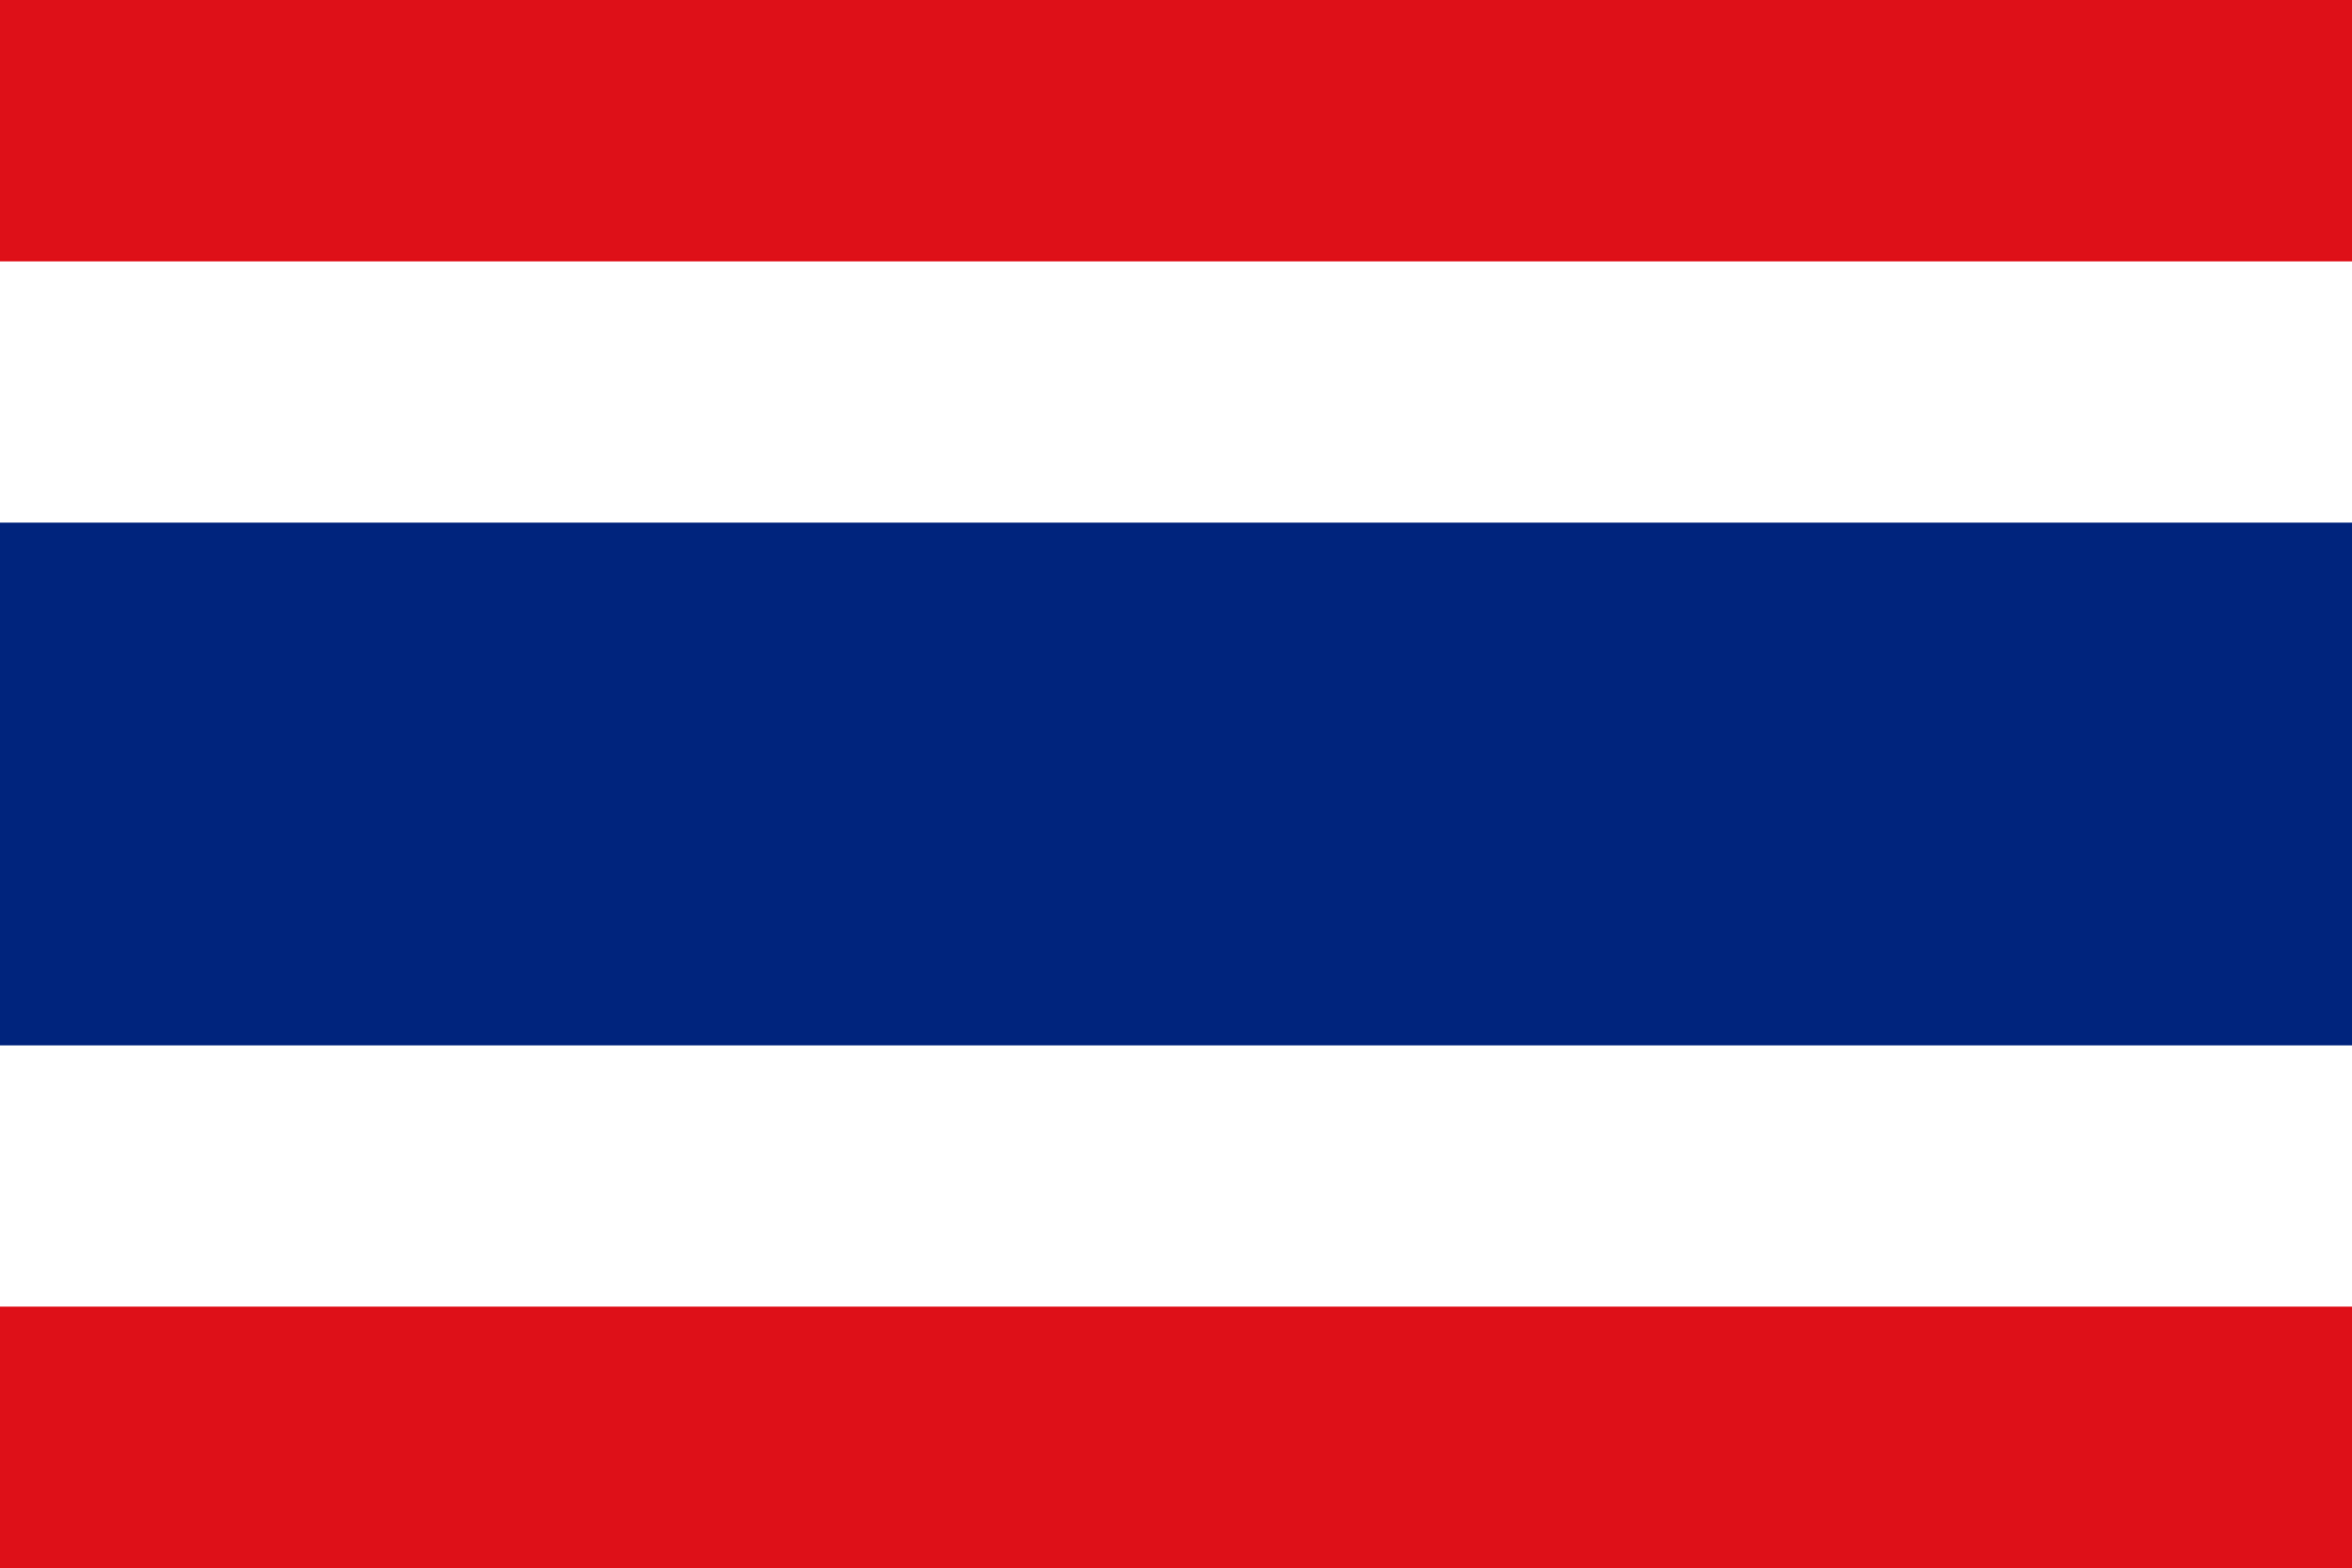 the image shows the thai flag